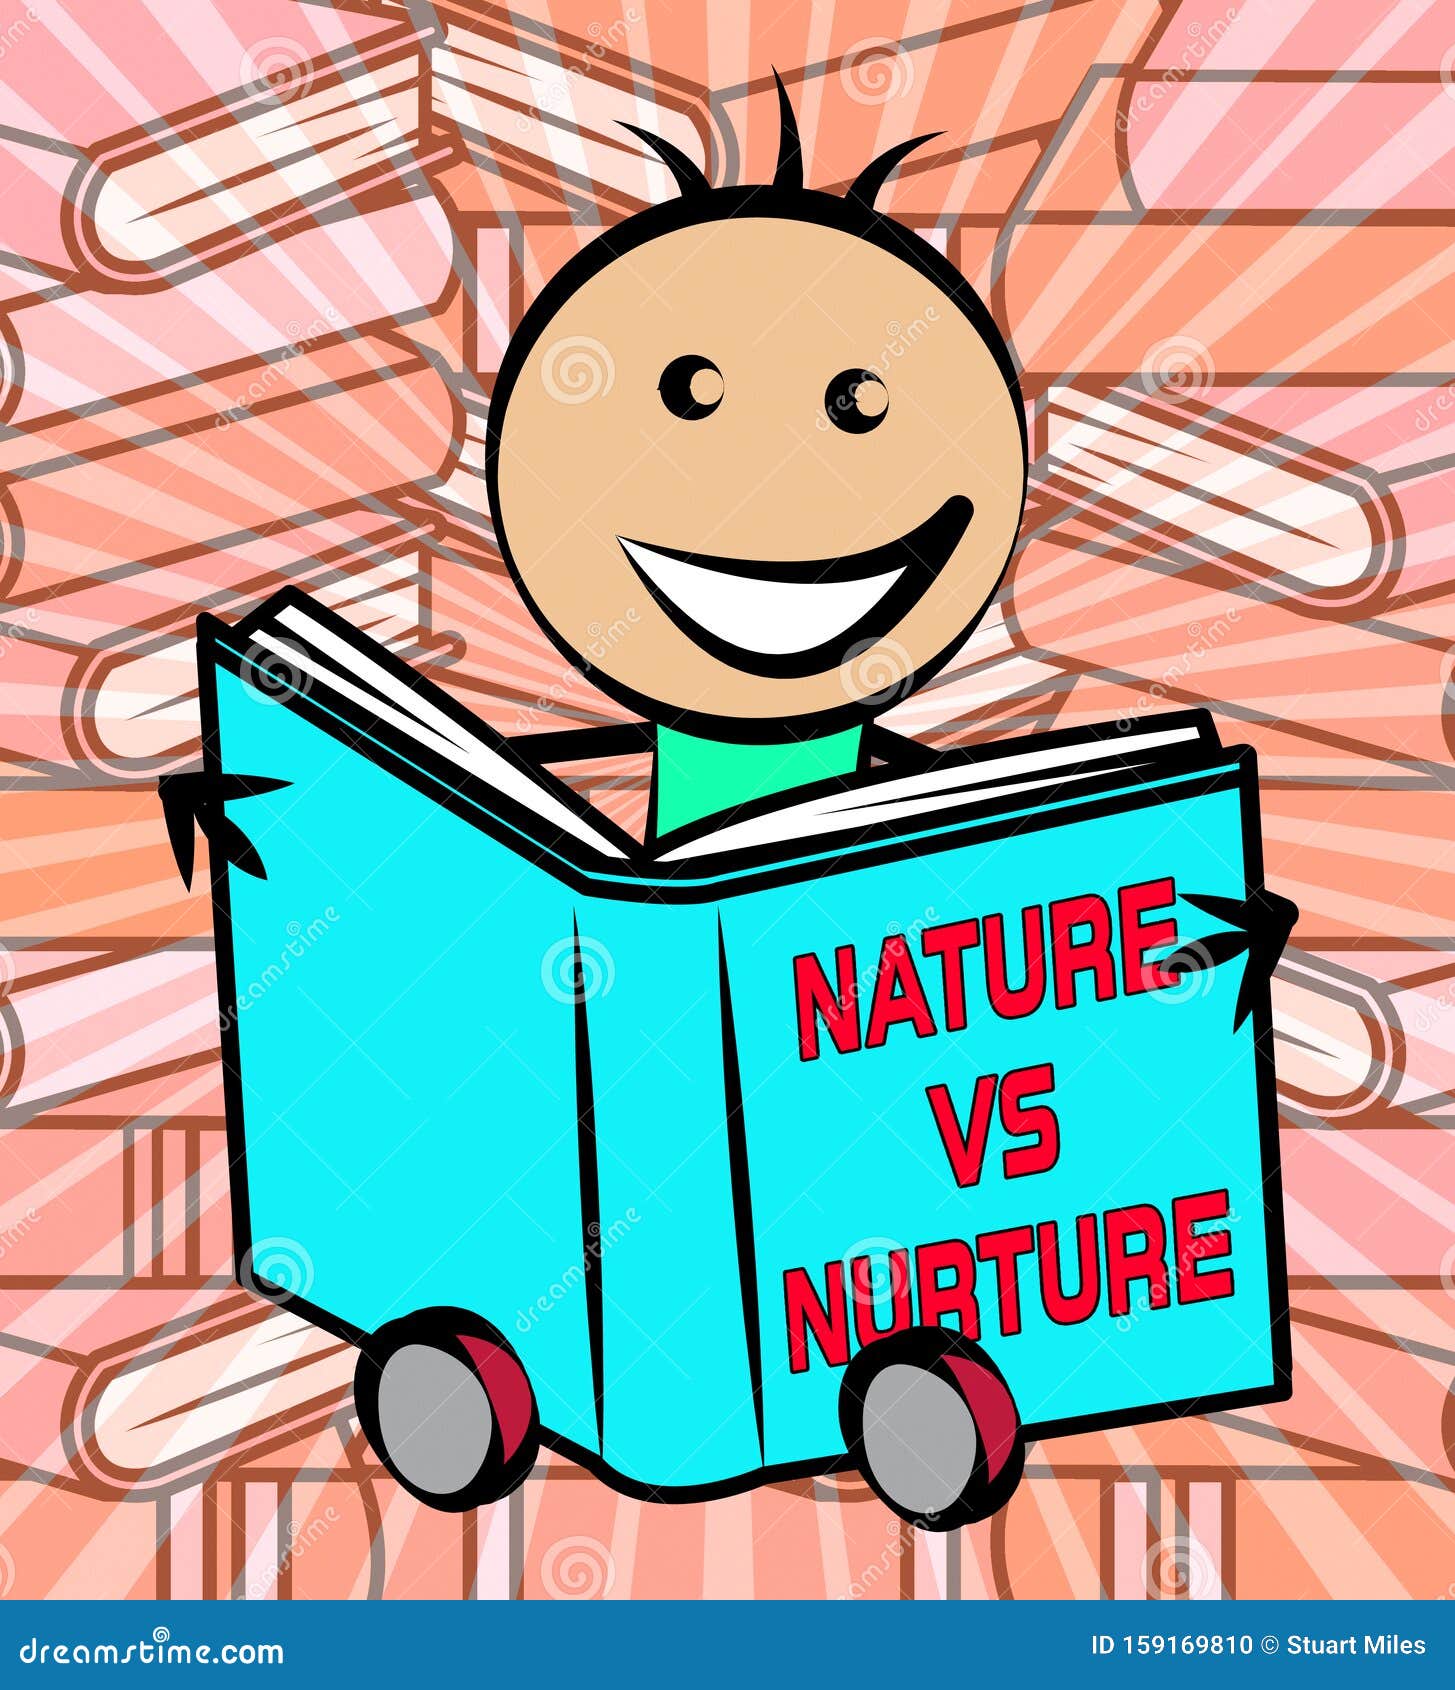 Nature Vs Nurture Report Means Theory of Natural Intelligence Against - 3d Illustration Stock Illustration - Illustration of young, environmental: 159169810